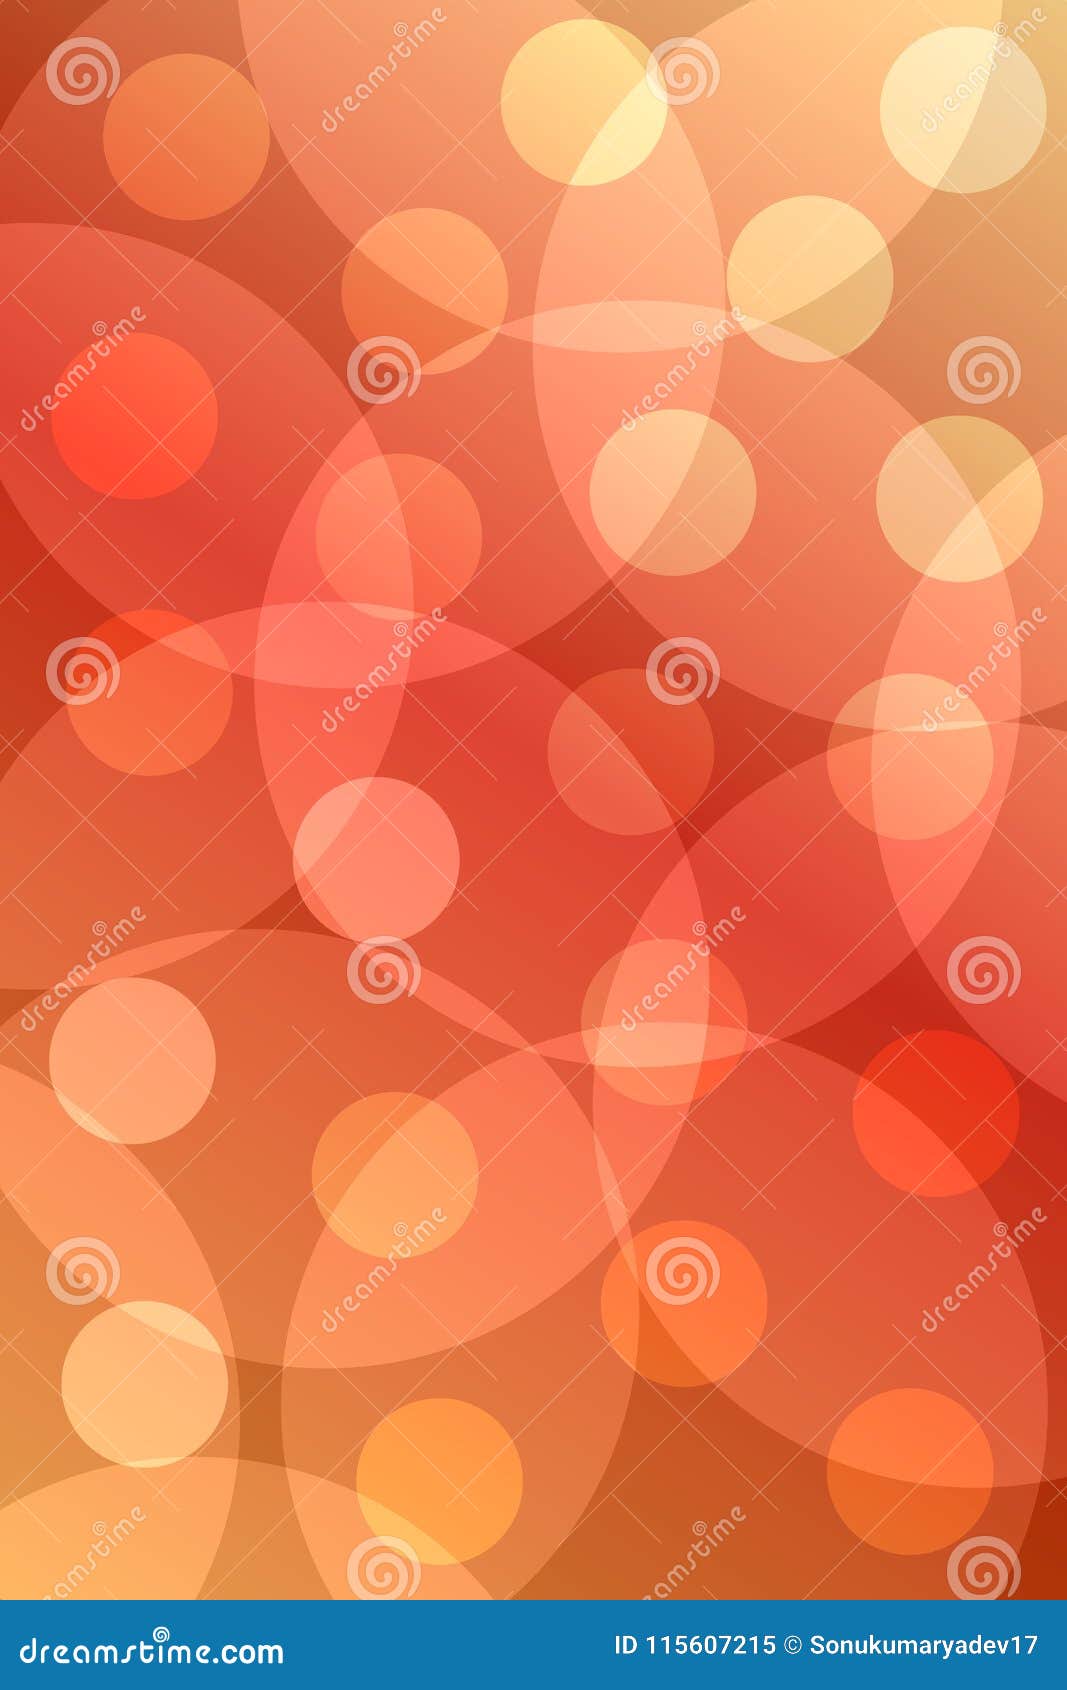 Light Red and Brown Colors Wallpaper Background Stock Vector - Illustration  of blood, artwork: 115607215